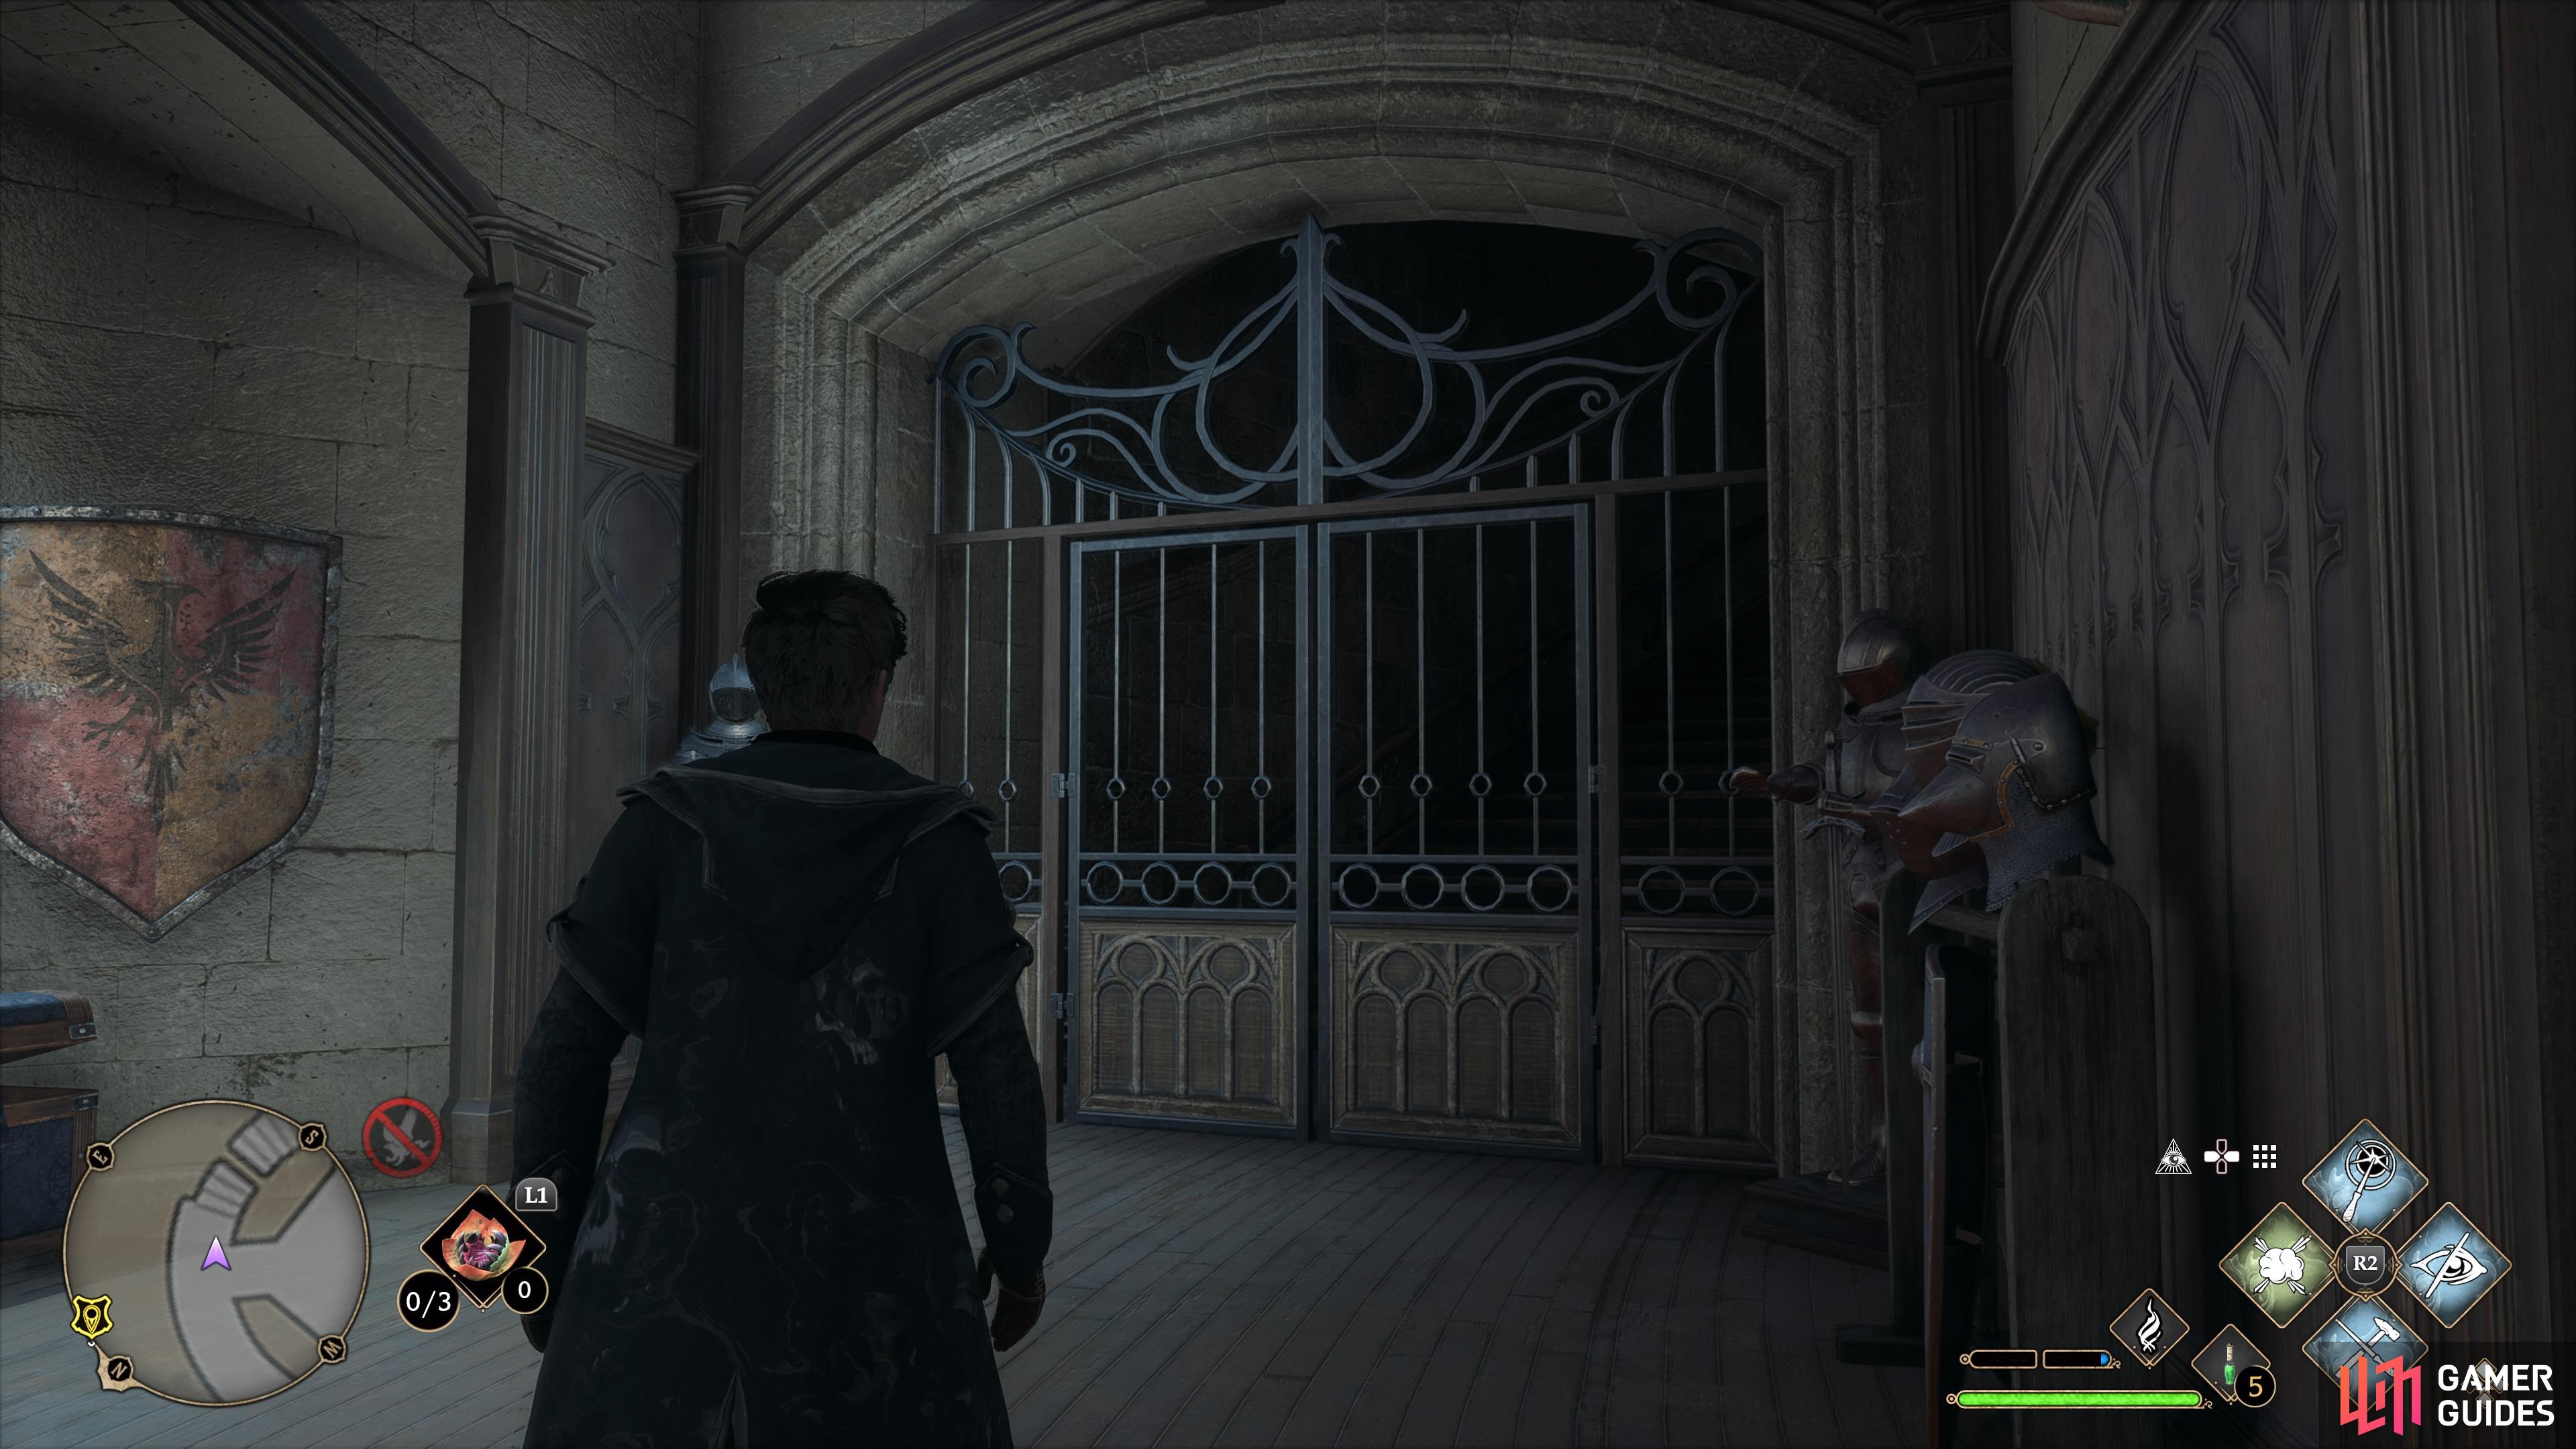 The Trophy Room locked gate